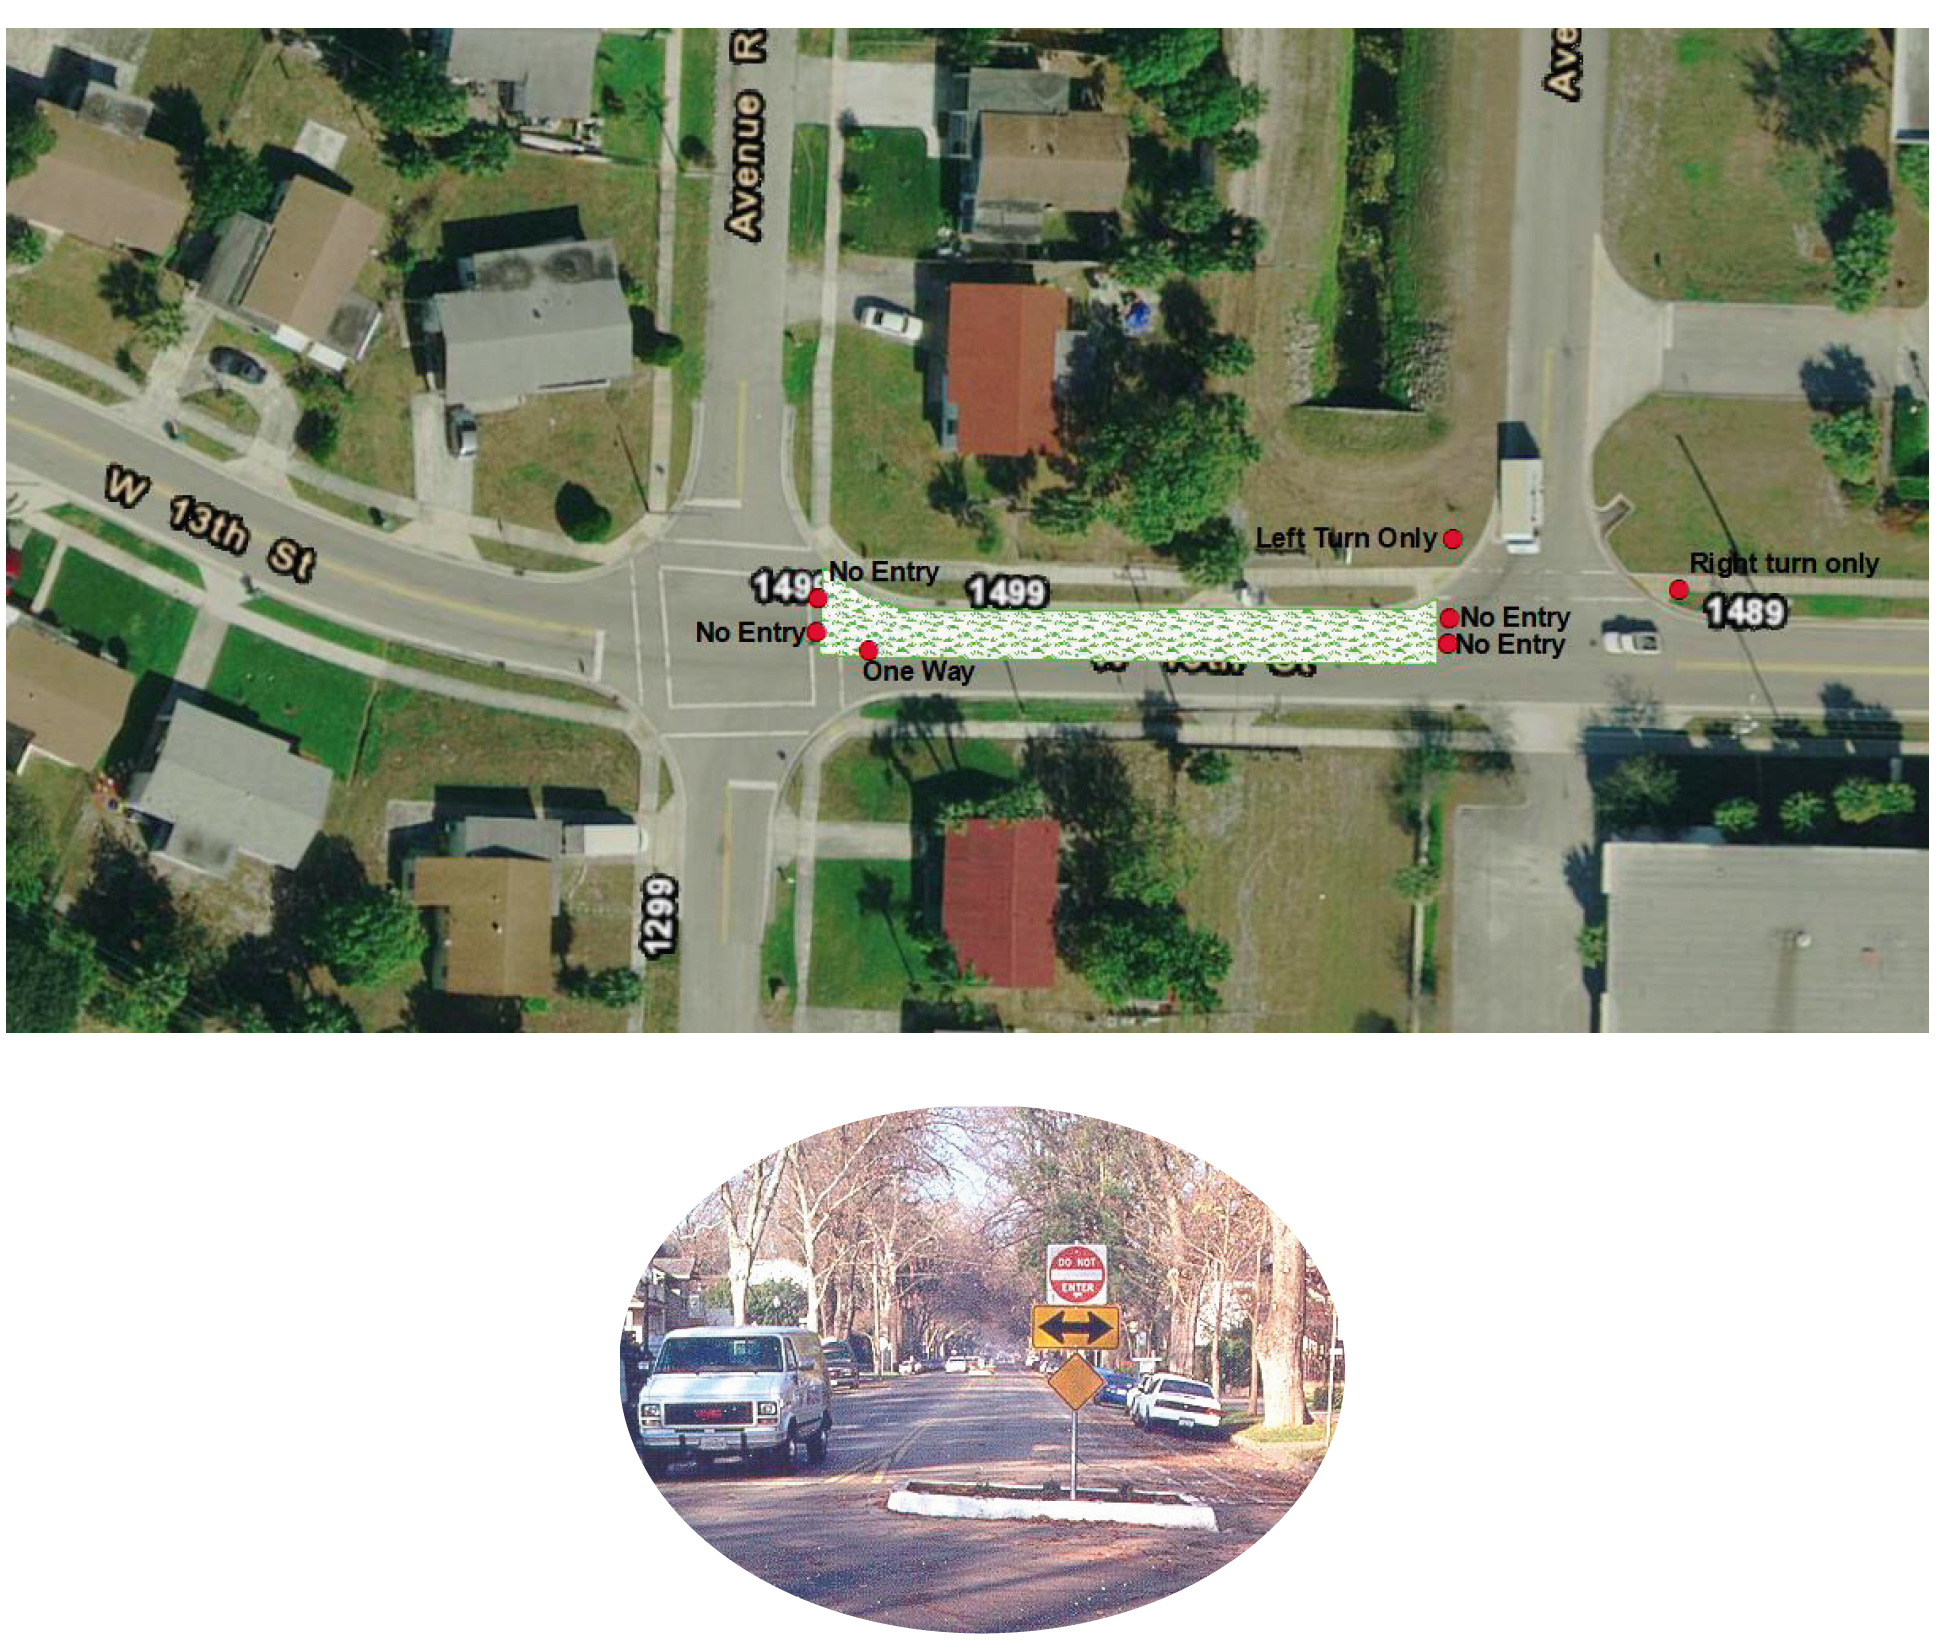 Option 3: Partial Road Closure The closure would force commercial truck traffic to avoid 13th Street. With this option, speed can be reduced from 3-9 mph. In the image below, Westbound Traffic would not have access to drive through 13th Street.